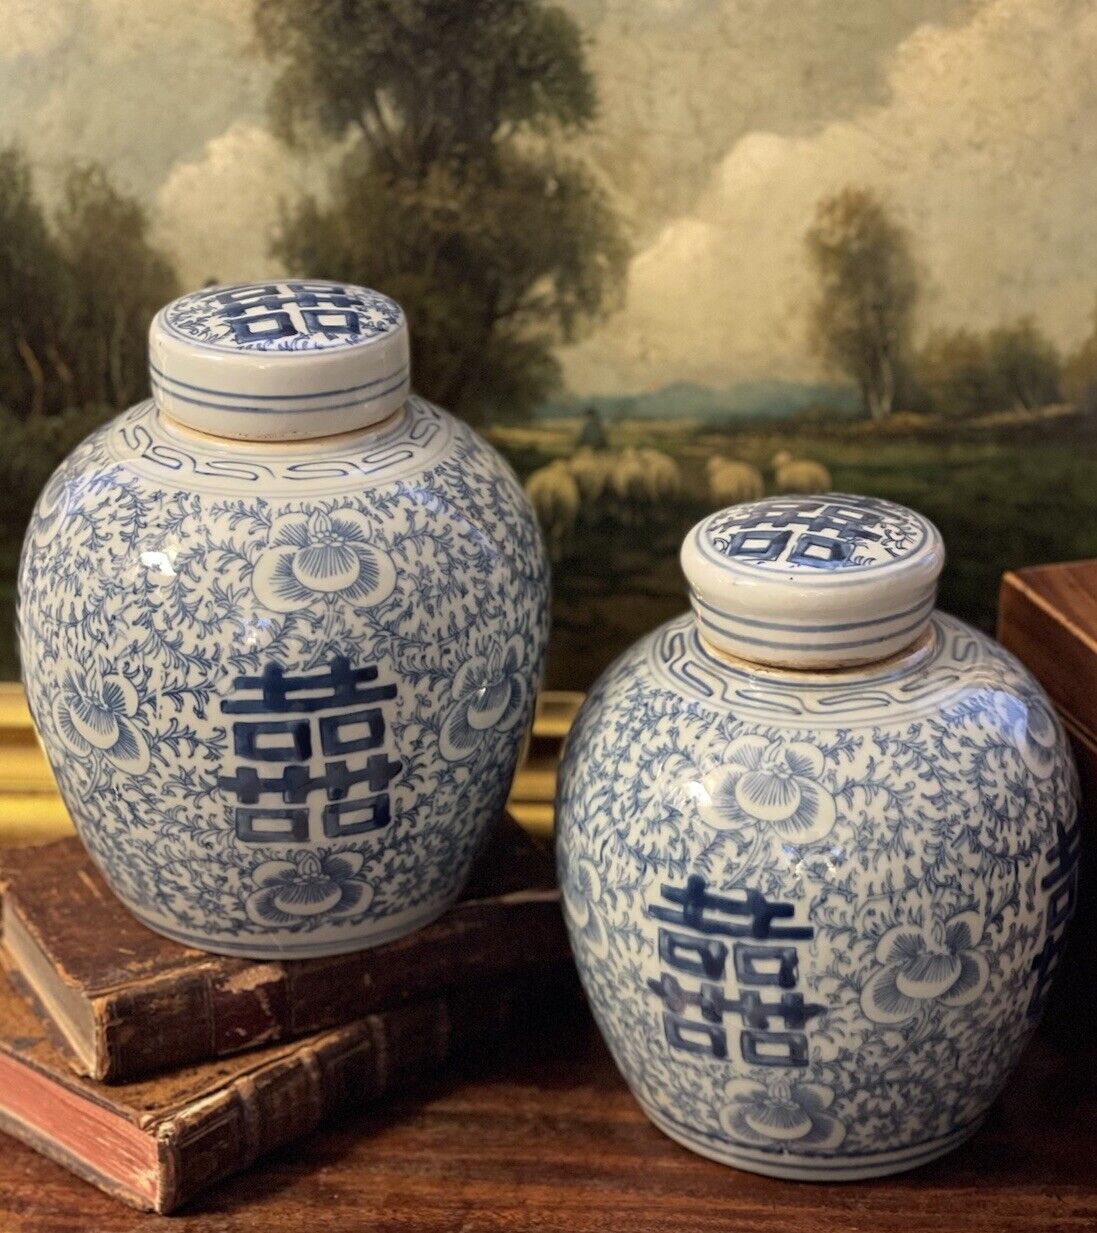 Stunning Blue White Chinoiserie Double Happiness Ginger Tea Caddy Jar Pair 6.75”